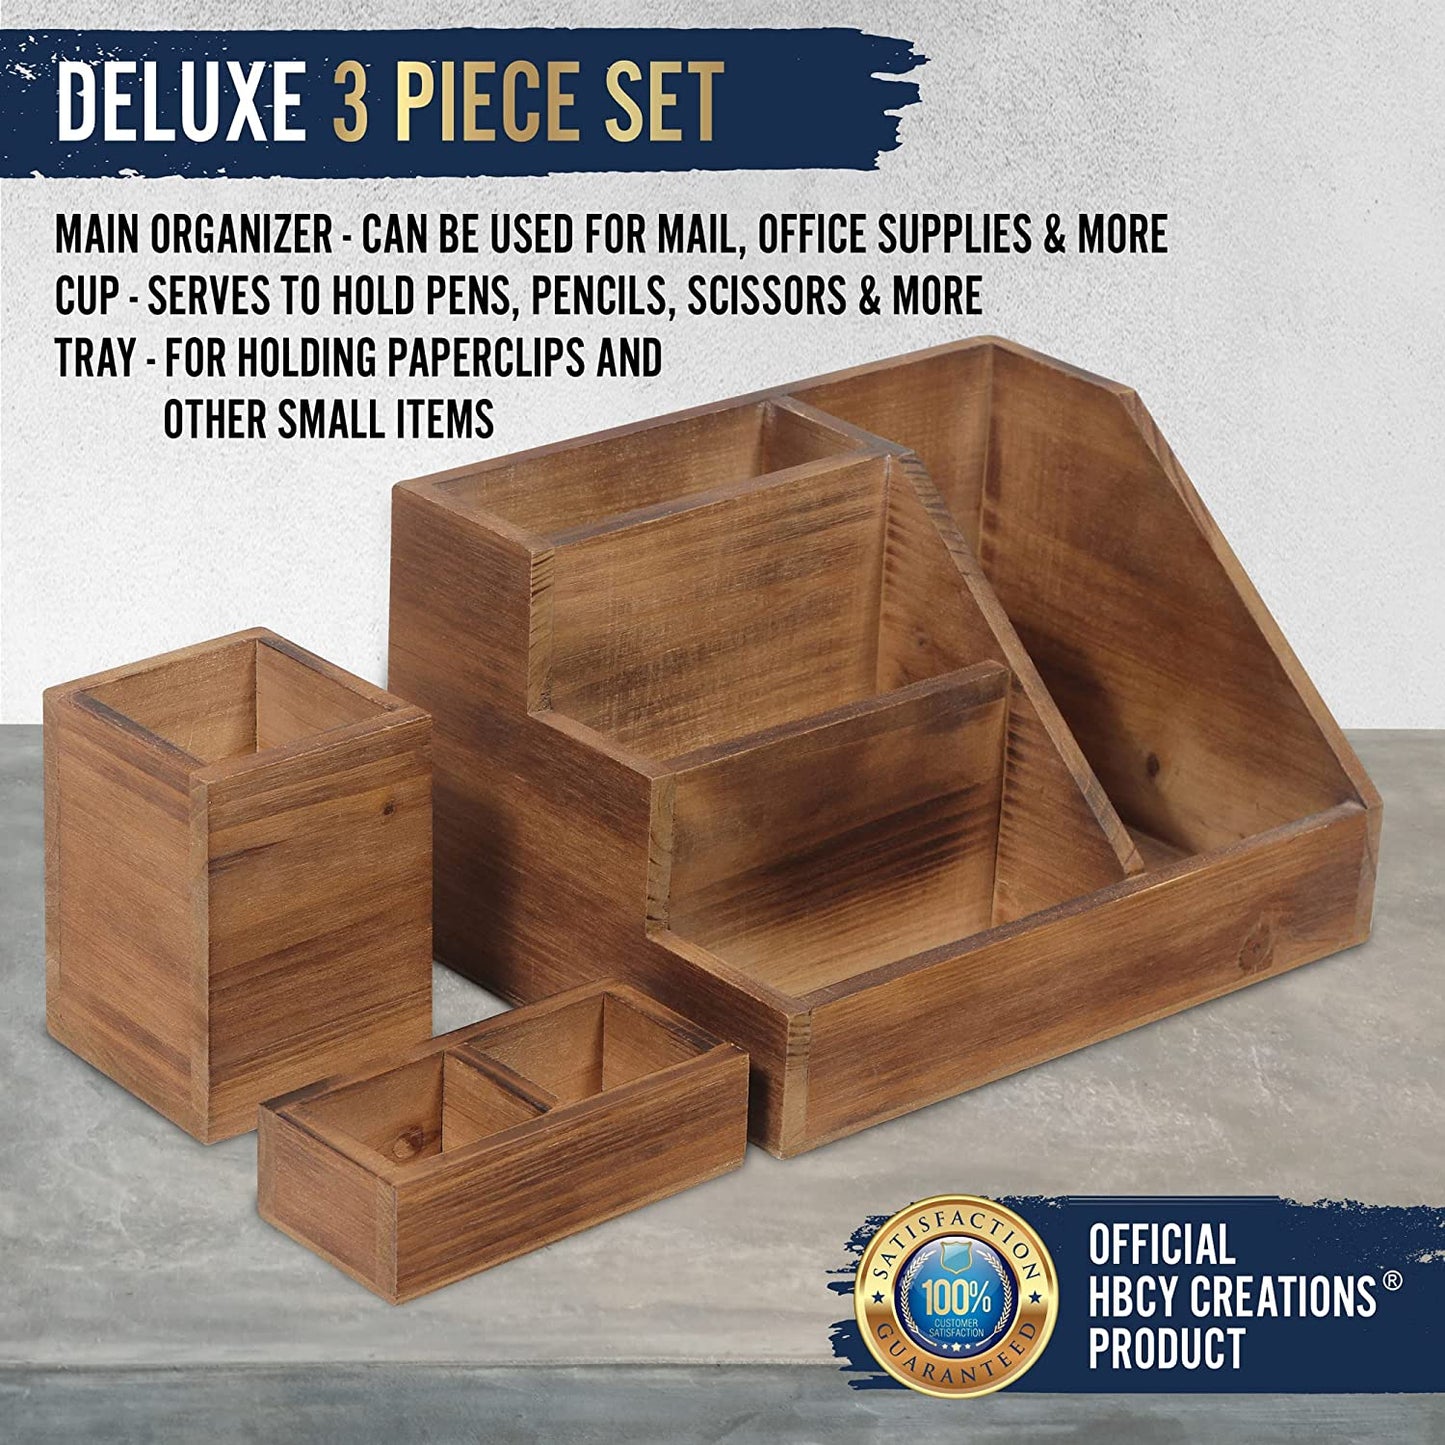 3-Piece Rustic Wooden Desk Organizer Set - Ideal for Rustic or Industrial Home Decor - Perfect for Organizing Mail and Makeup on Desktop or Vanity